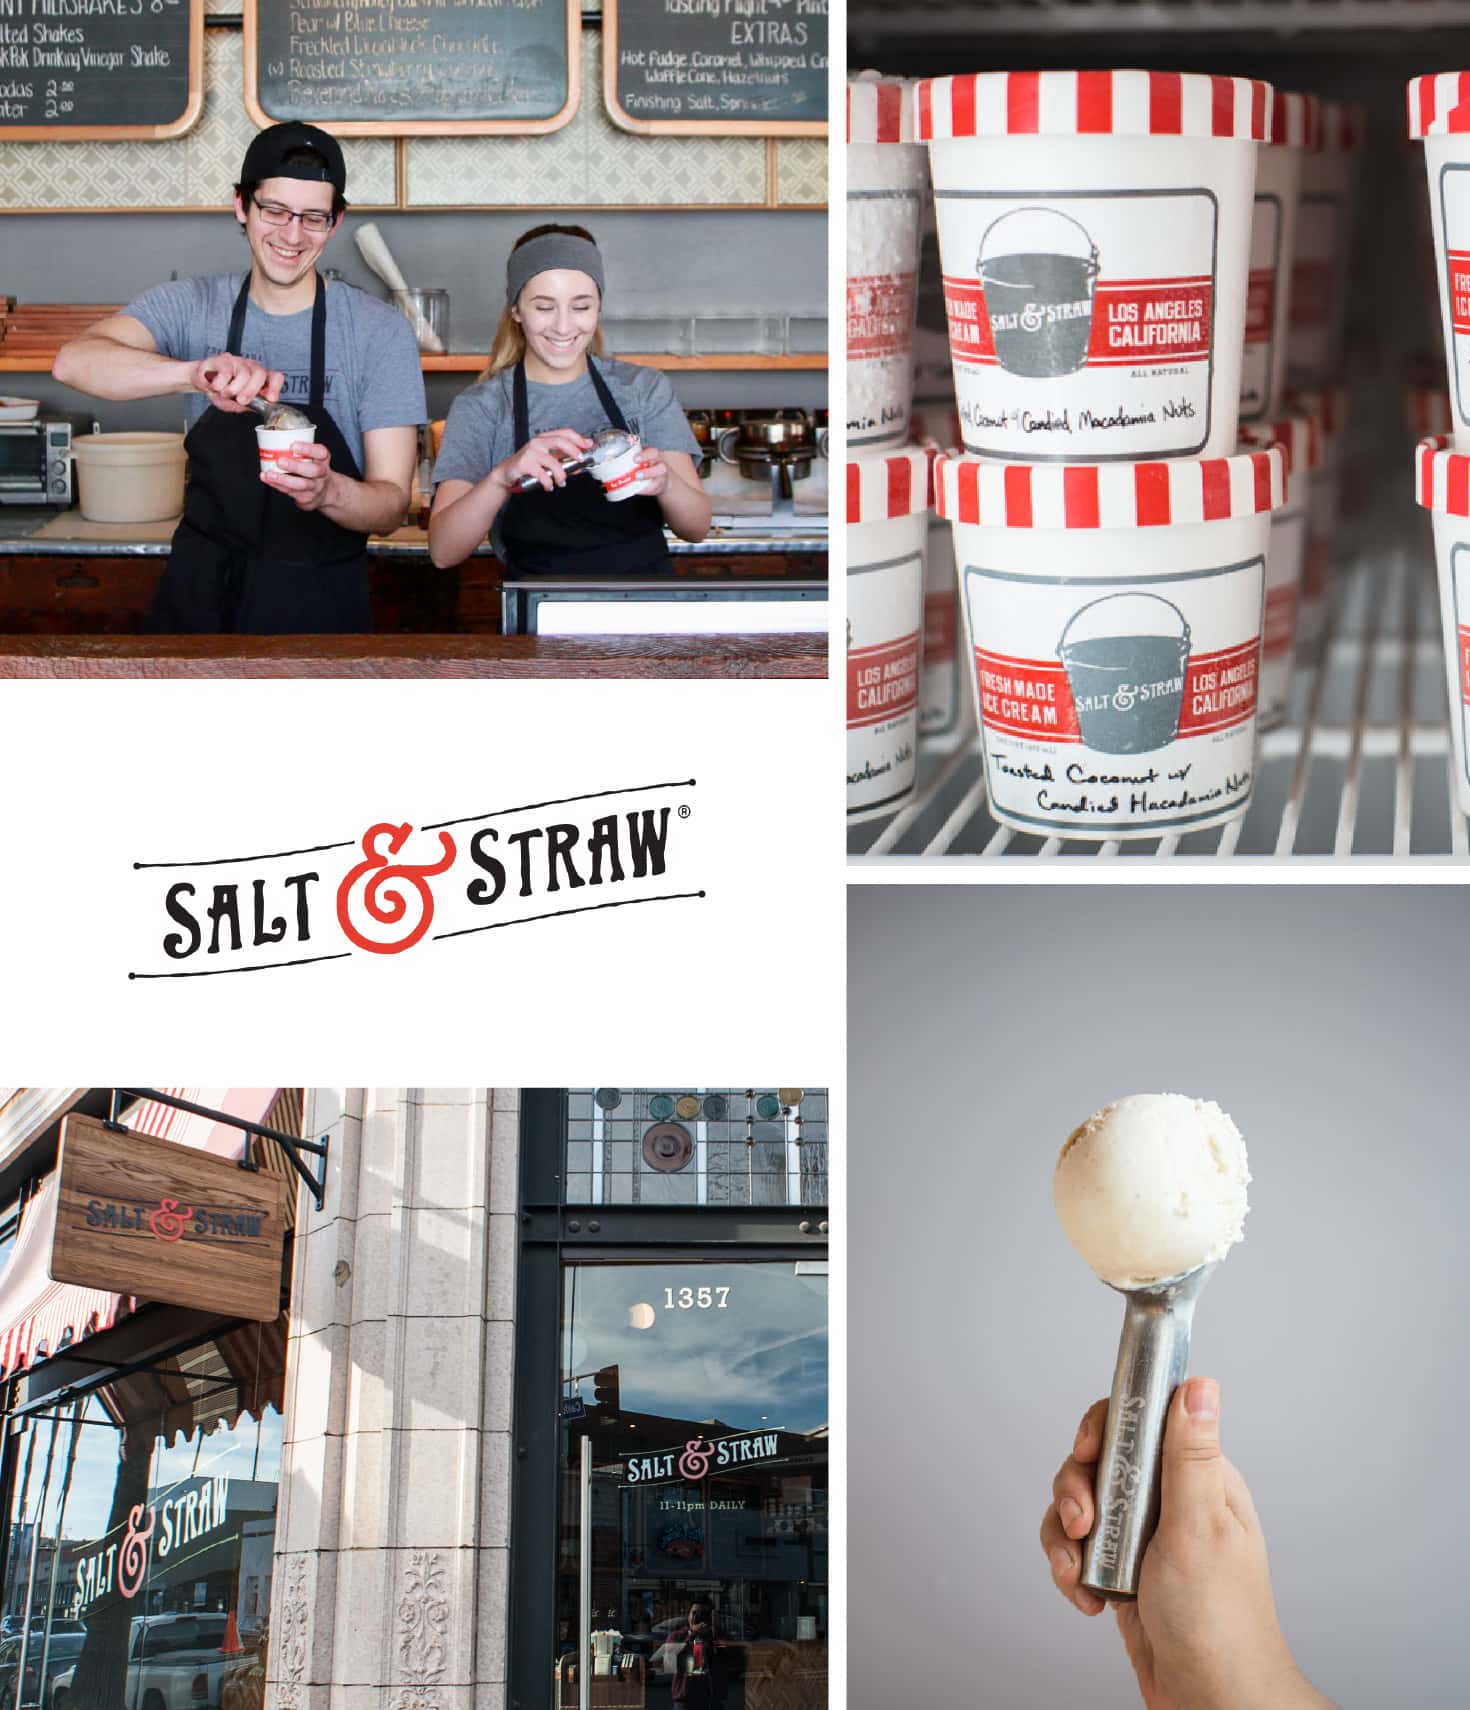 Salt and Straw Employees, Pints of Ice Cream, Hand Scooping Ice Cream, Signage of LA Shop